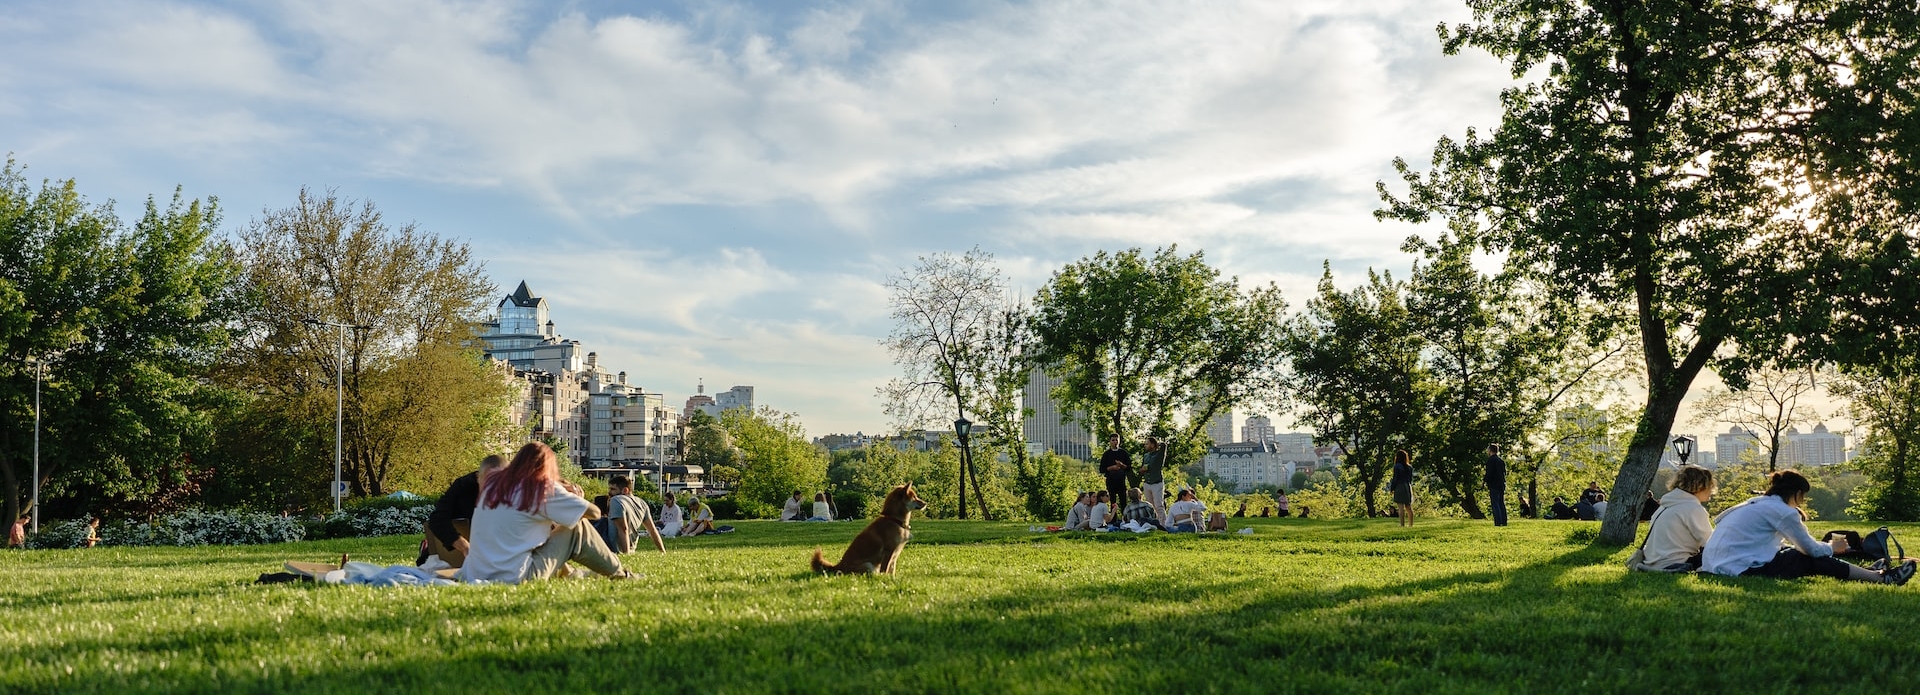 People and dogs sitting in a park. 